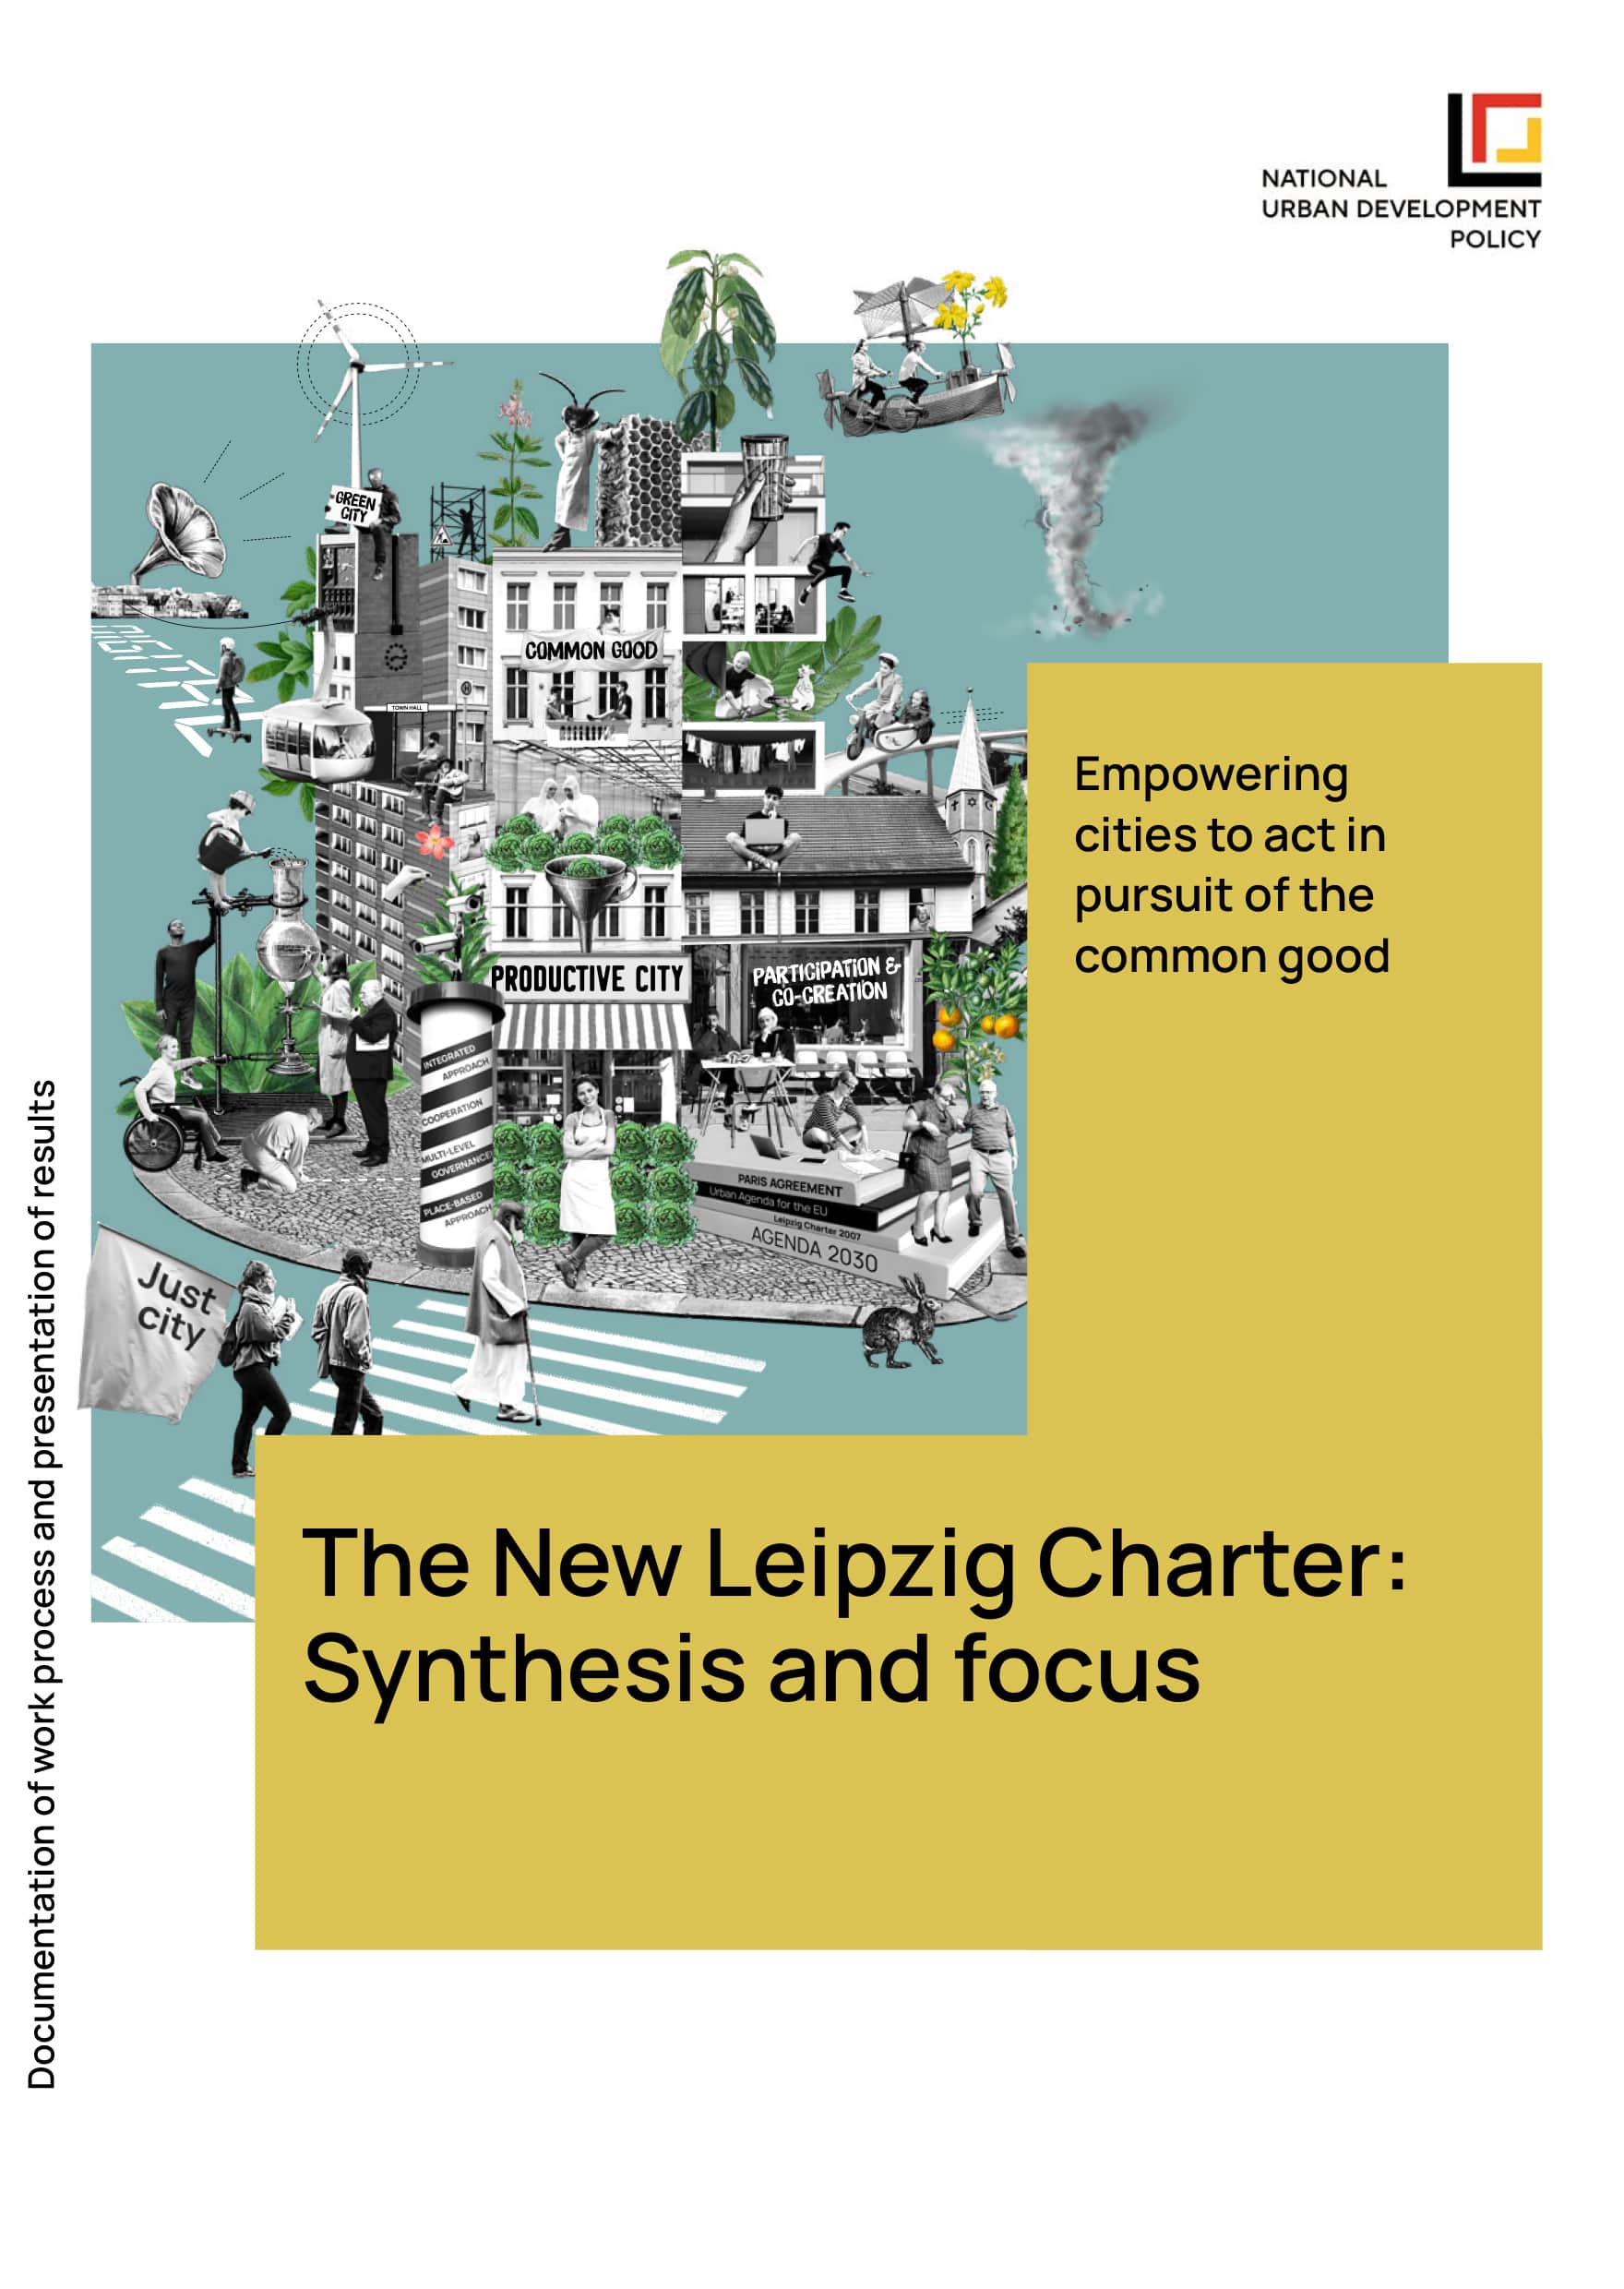 The New Leipzig – Charter: Synthesis and focus – Empowering cities to act in pursuit of the common good